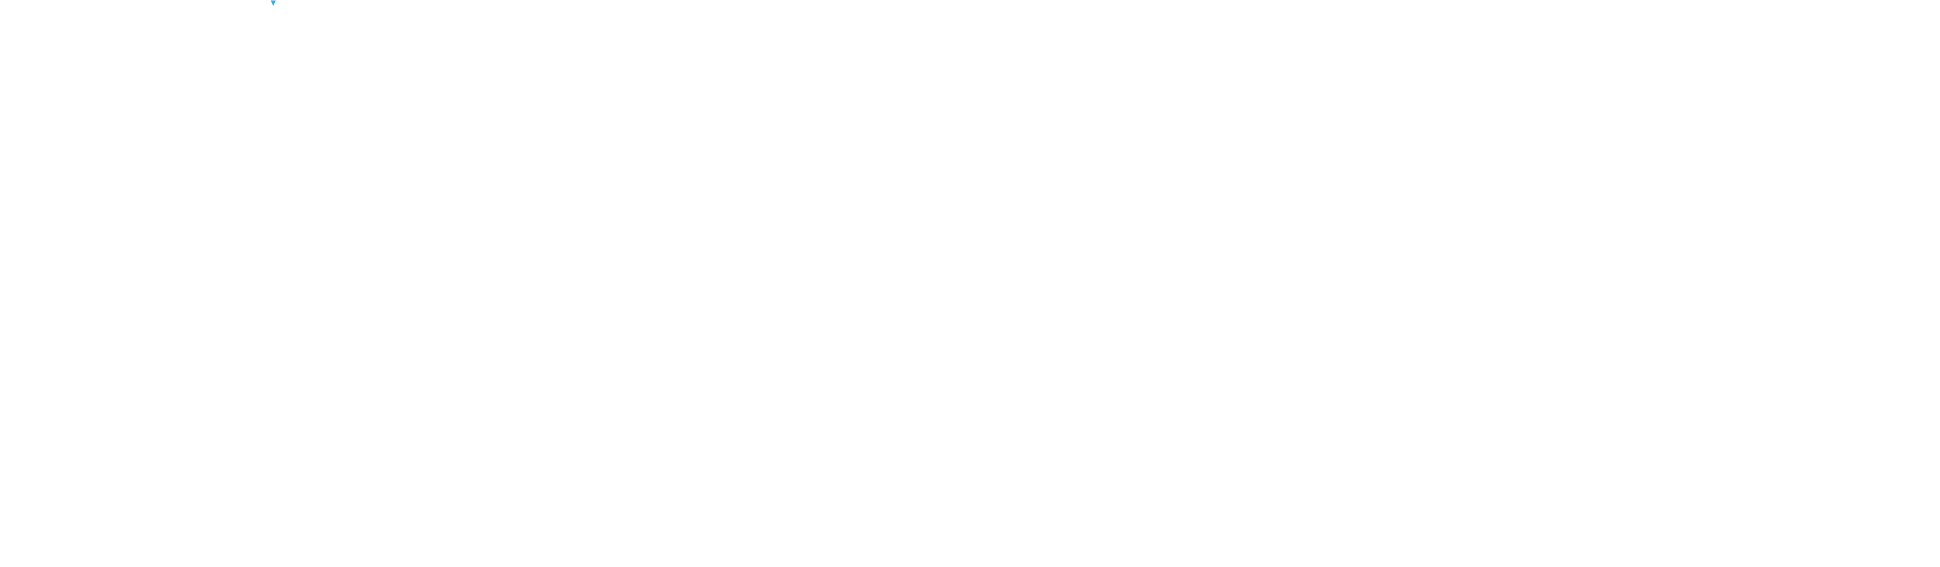 BlueOrange Property Management | Sign in or Join